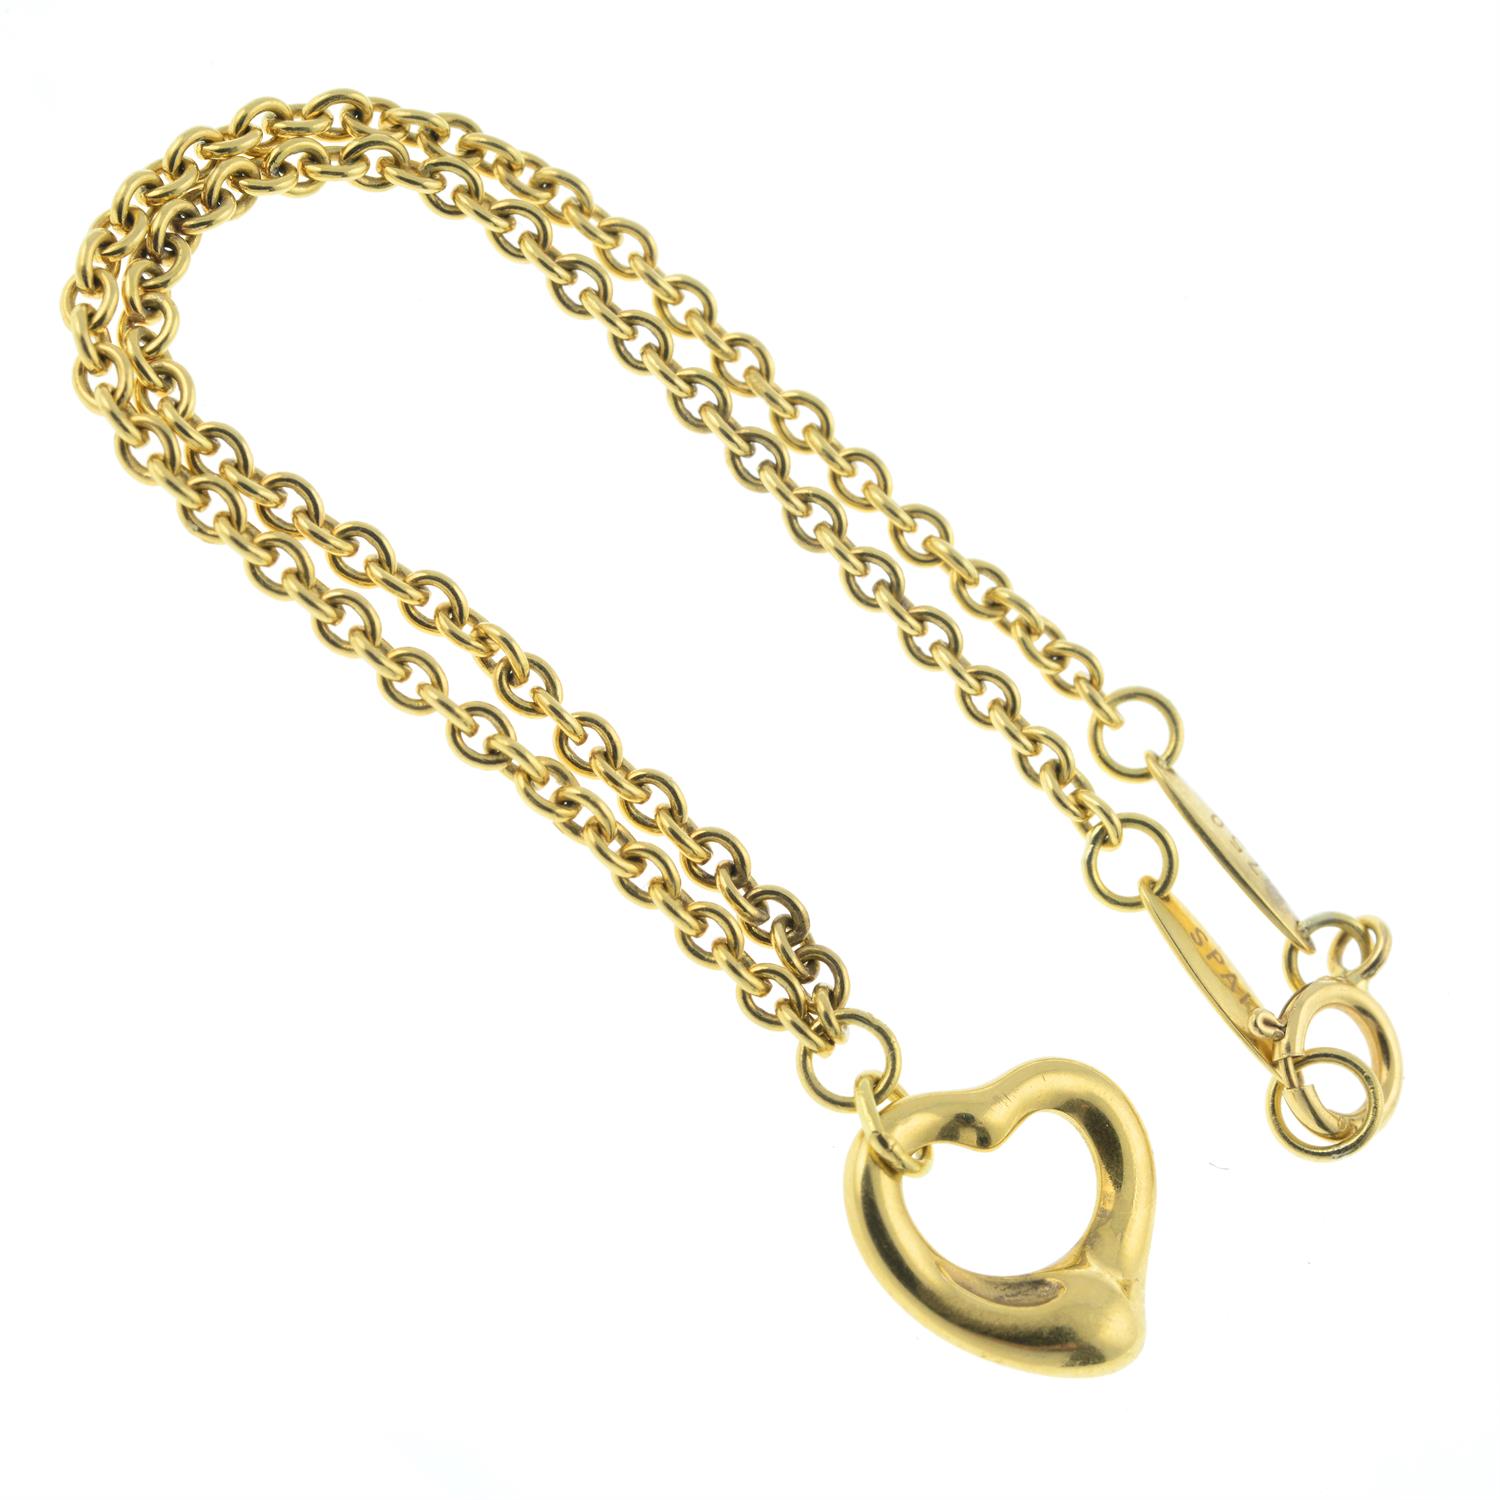 An 'Open Heart' charm, on trace-link chain, by Elsa Peretti, for Tiffany & Co. - Image 2 of 2